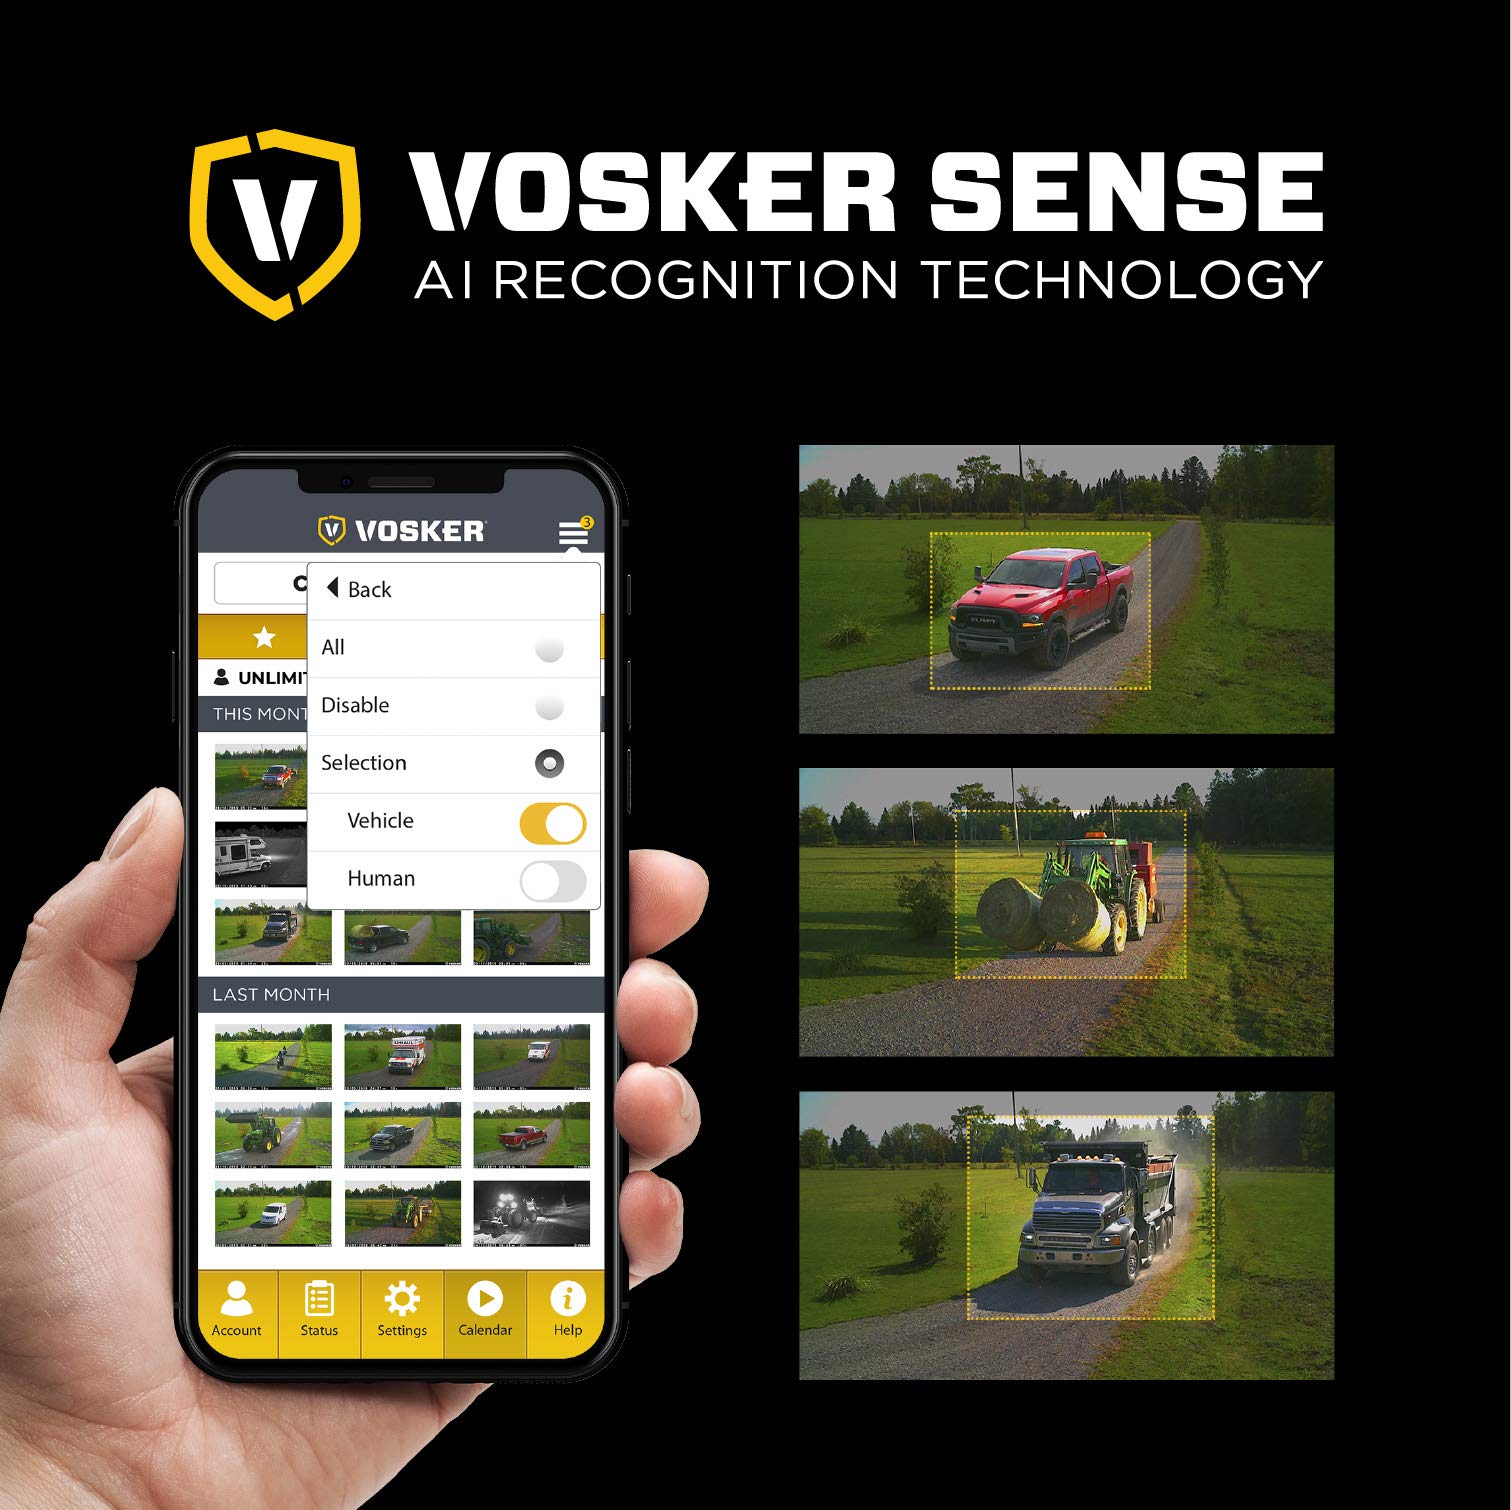 Vosker V200 - US Security Pack Outdoor Weatherproof Cellular Security Camera with LTE Wireless & Built-in Solar Panel | AI Image Recognition Feature with Night Vision|